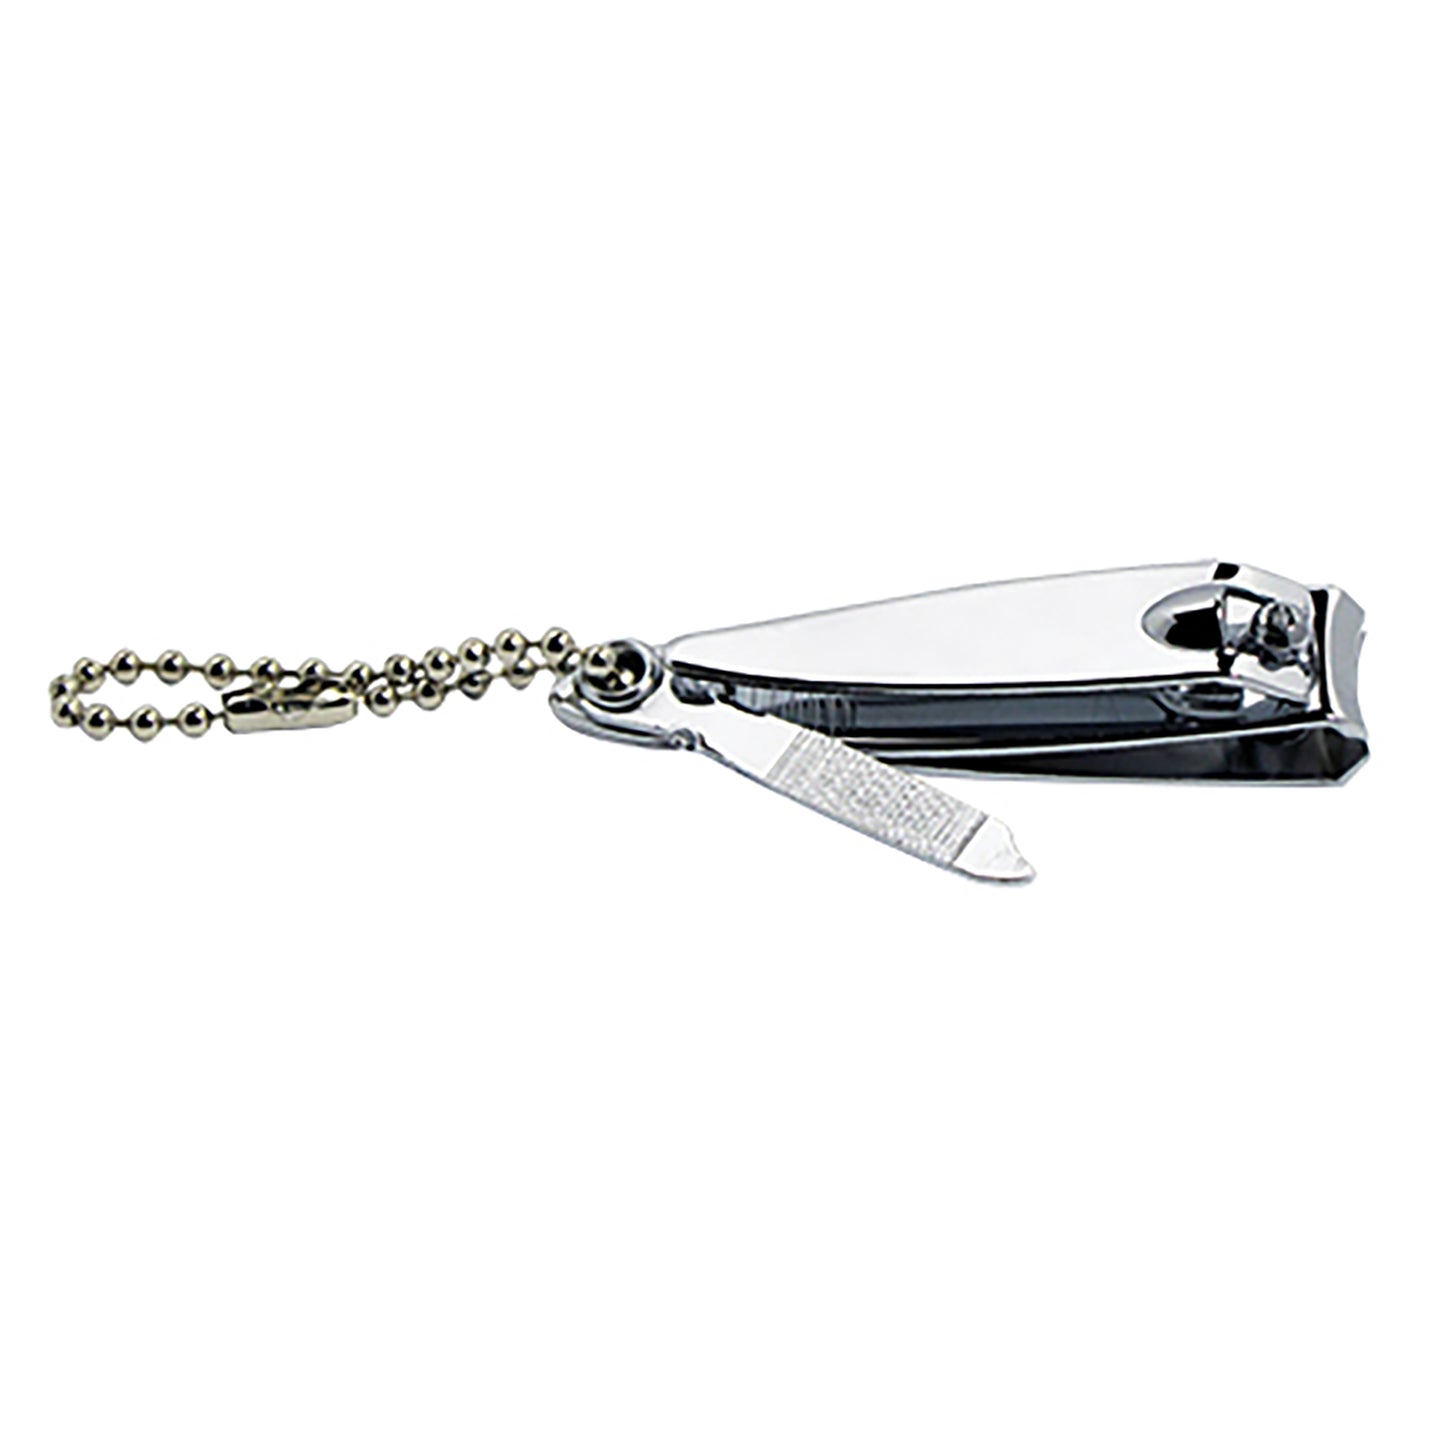 72PC FINGER NAIL CLIPPERS JAR